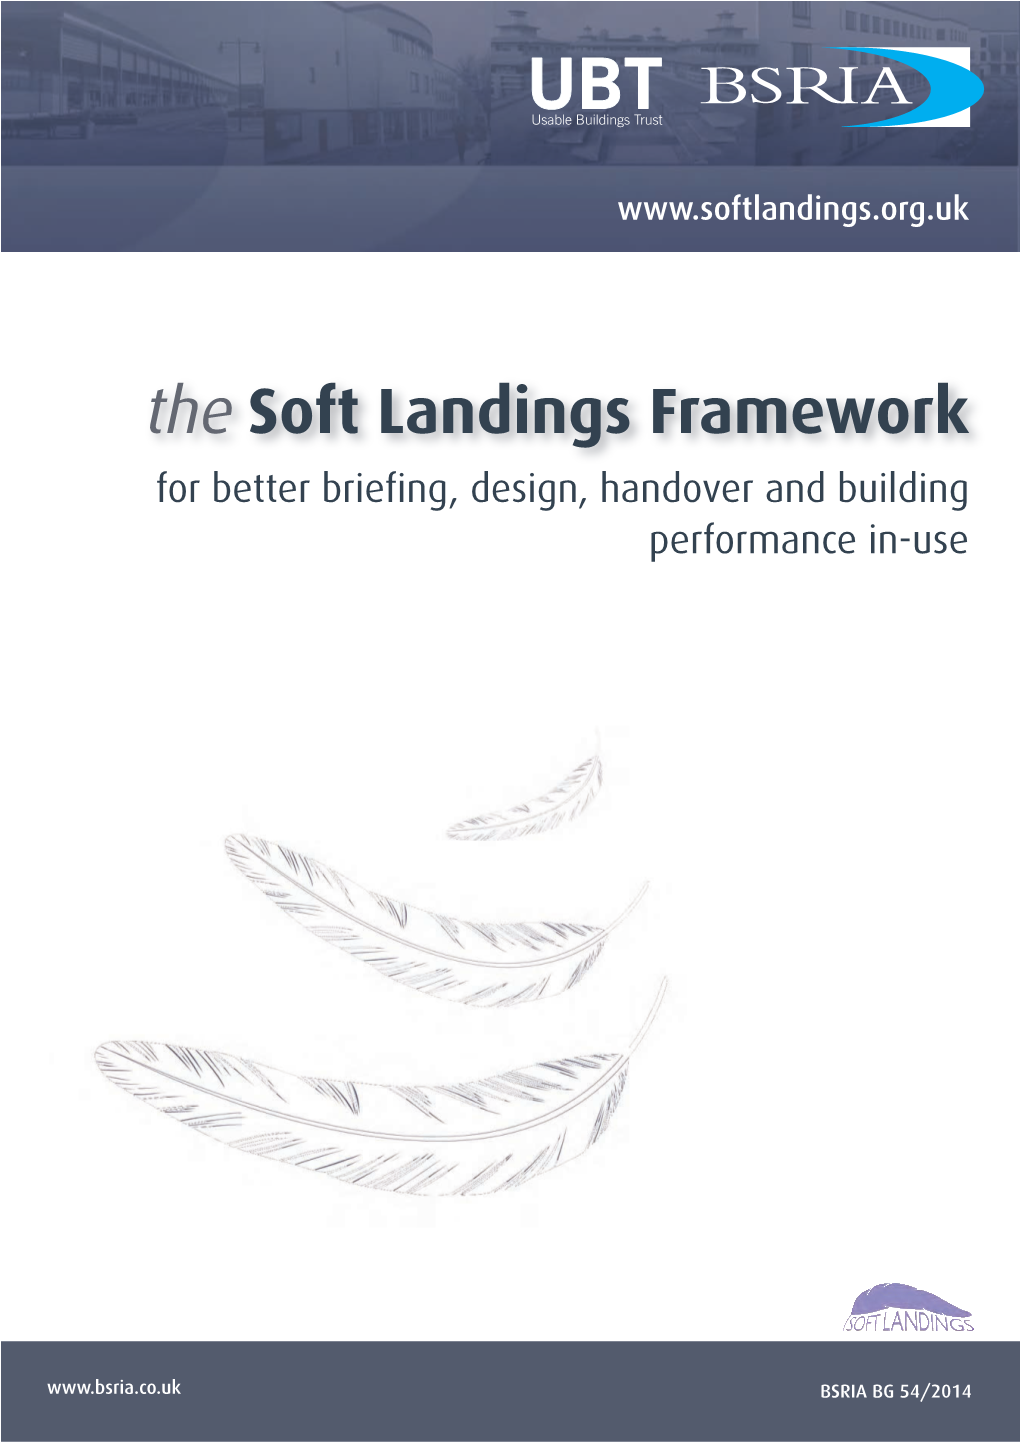 The Soft Landings Framework for Better Briefing, Design, Handover and Building Performance In-Use